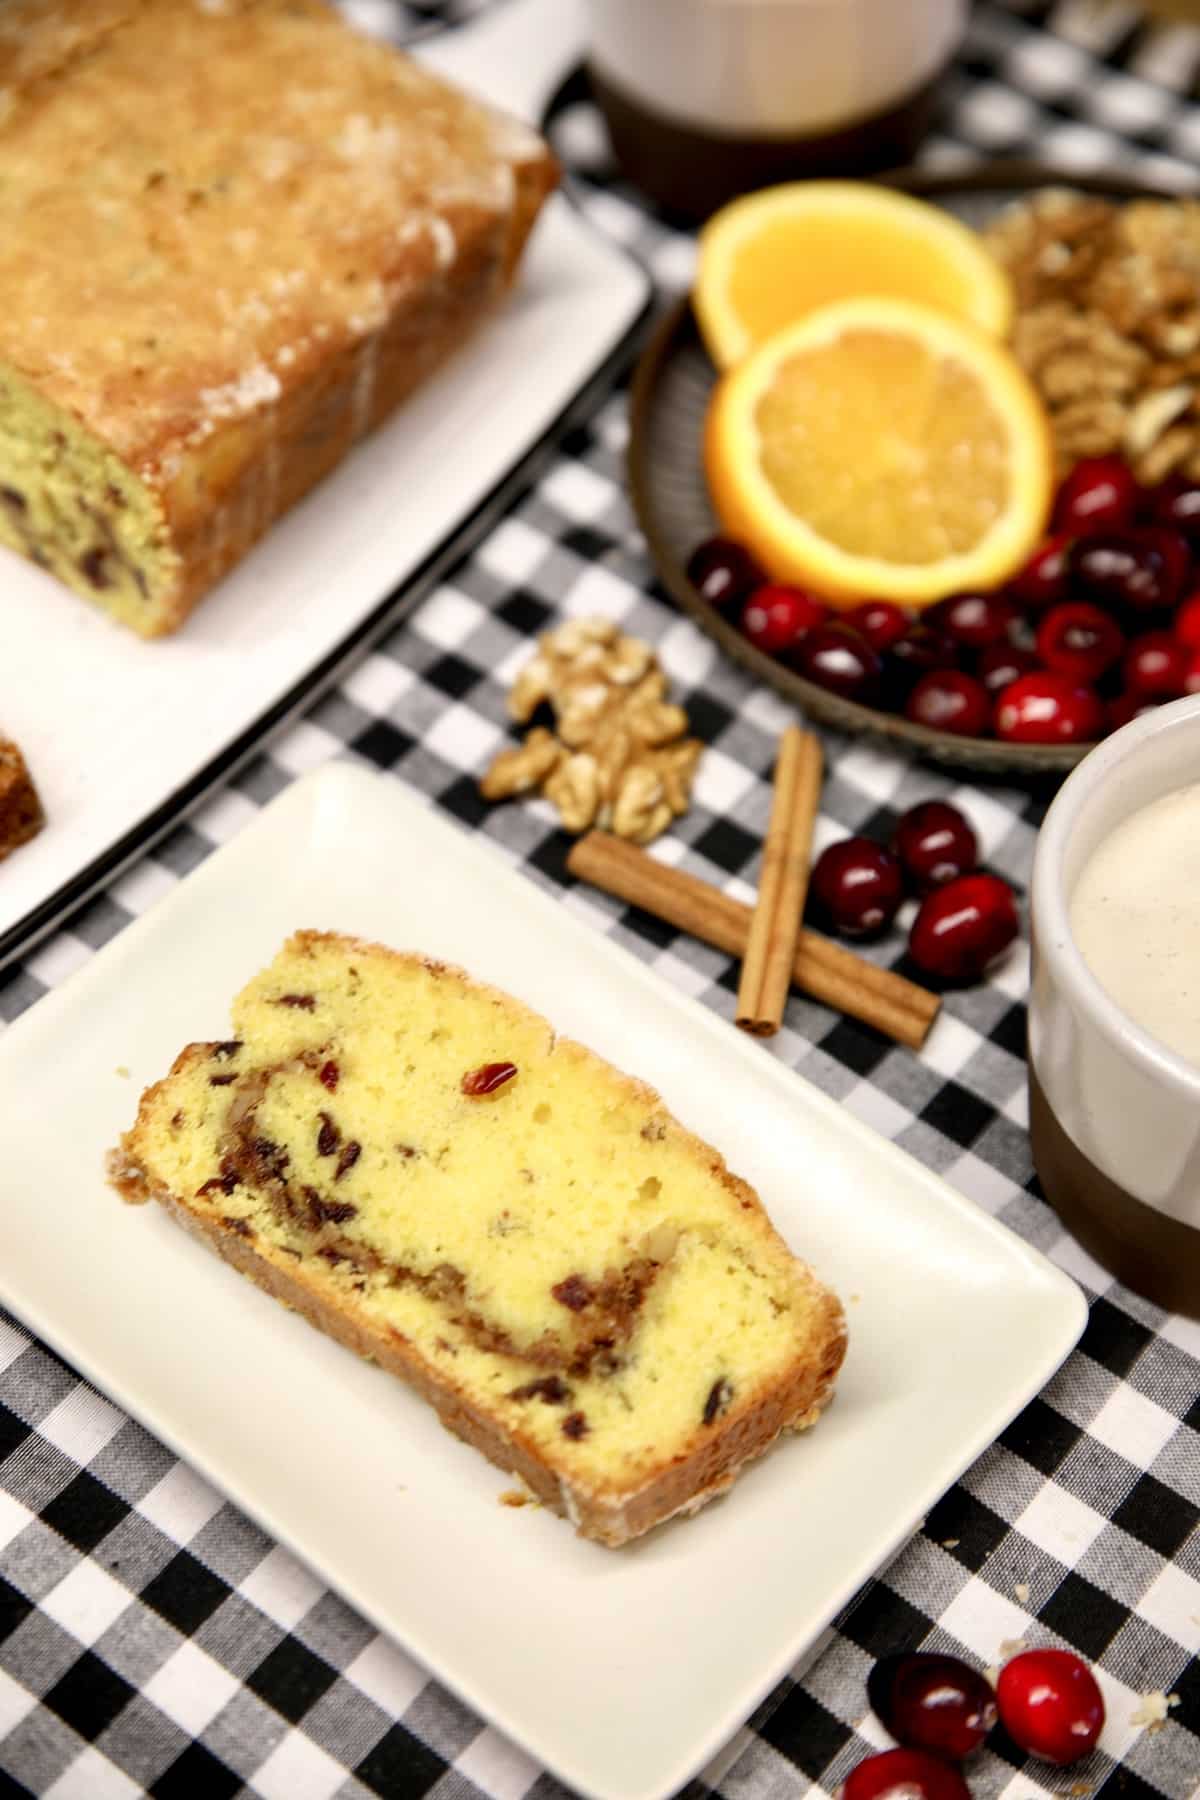 Slice of cranberry cake on a plate, loaf in background.